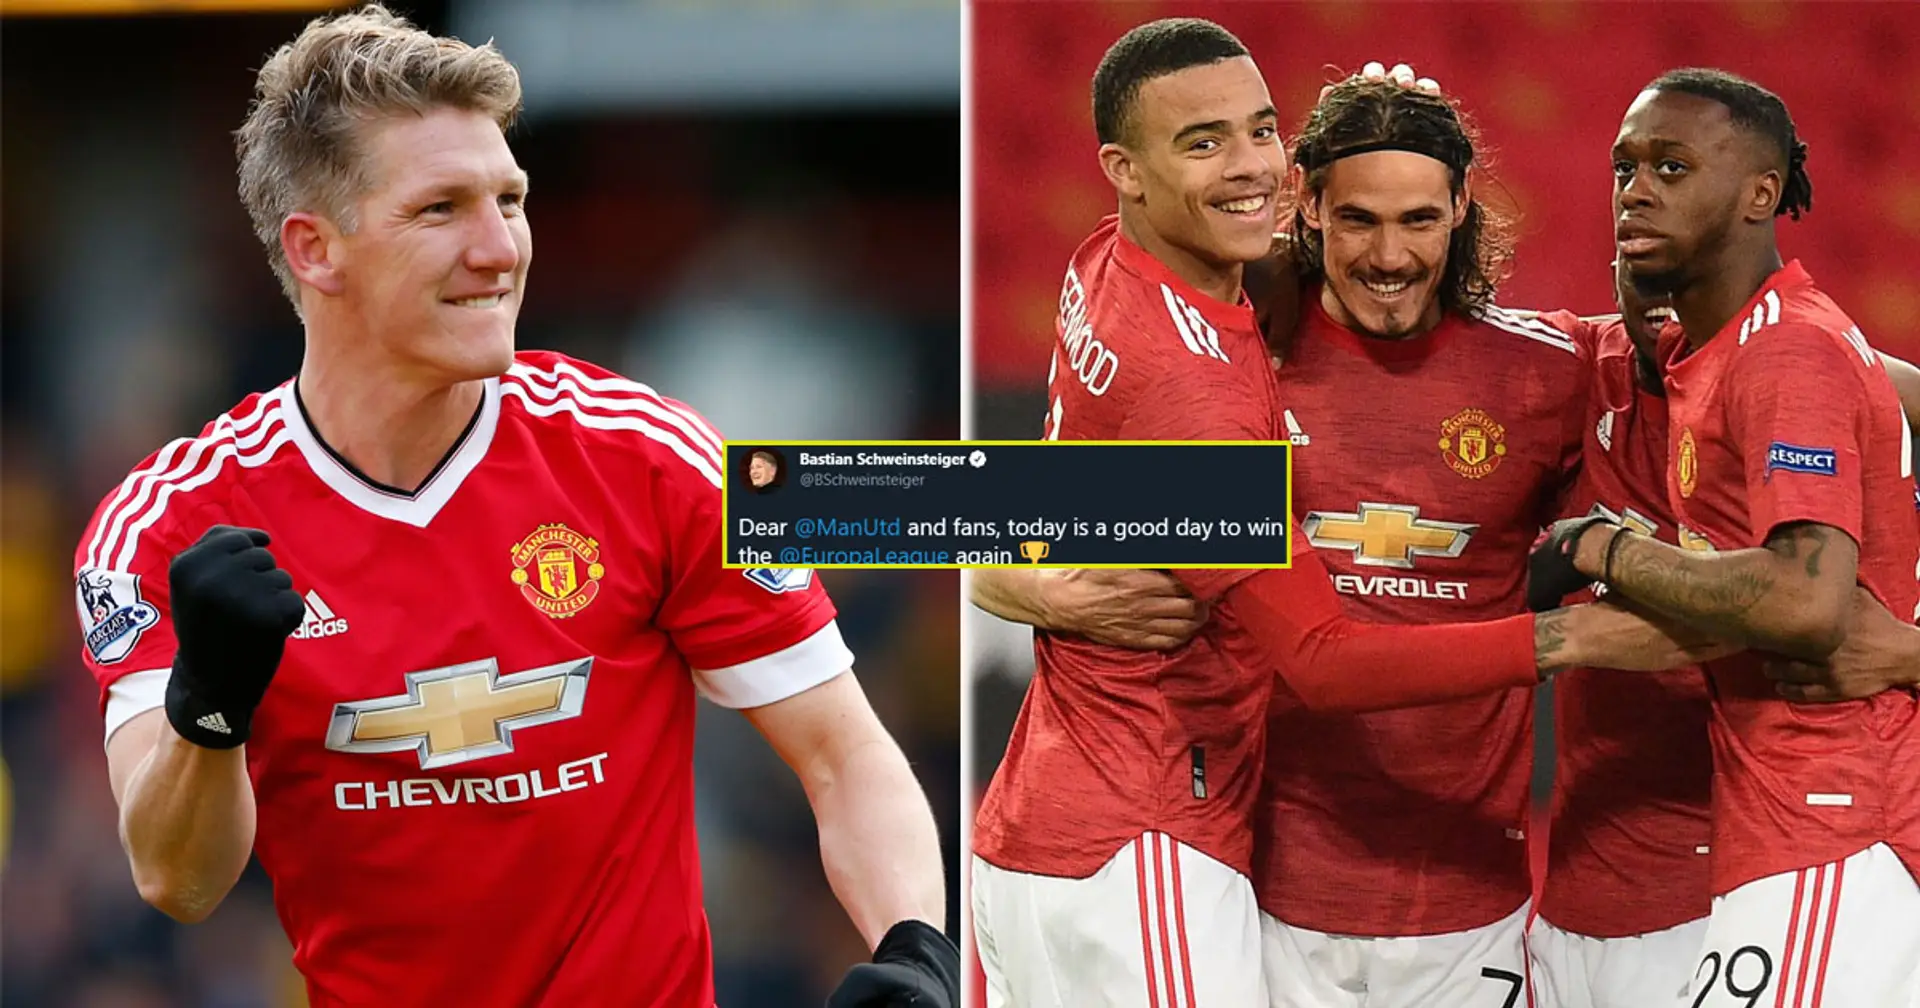 'Today is a good day to win the Europa League': Bastian Schweinsteiger sends brilliant message to United before Villarreal clash